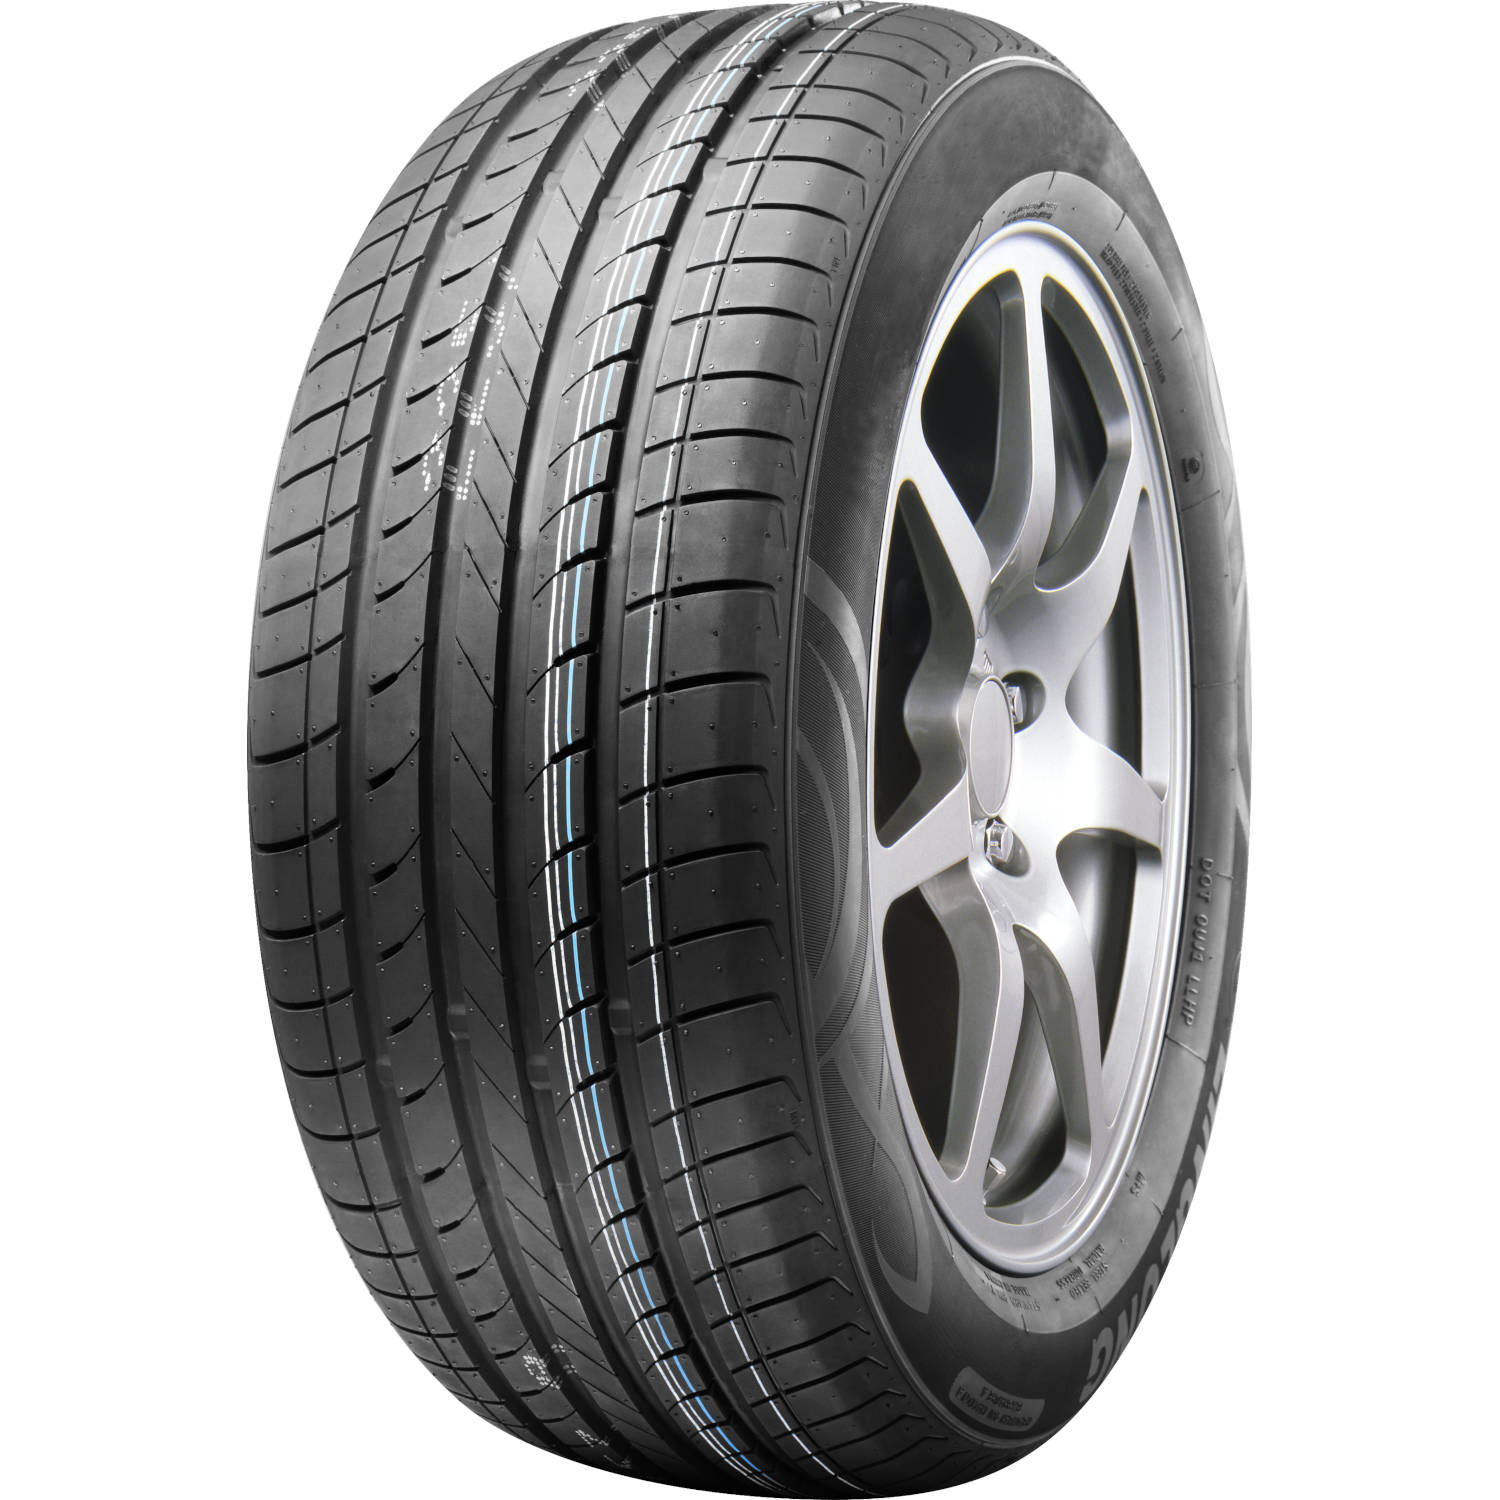 ROAD ONE CAVALRY HP 225/55R18 (27.8X8.9R 18) Tires